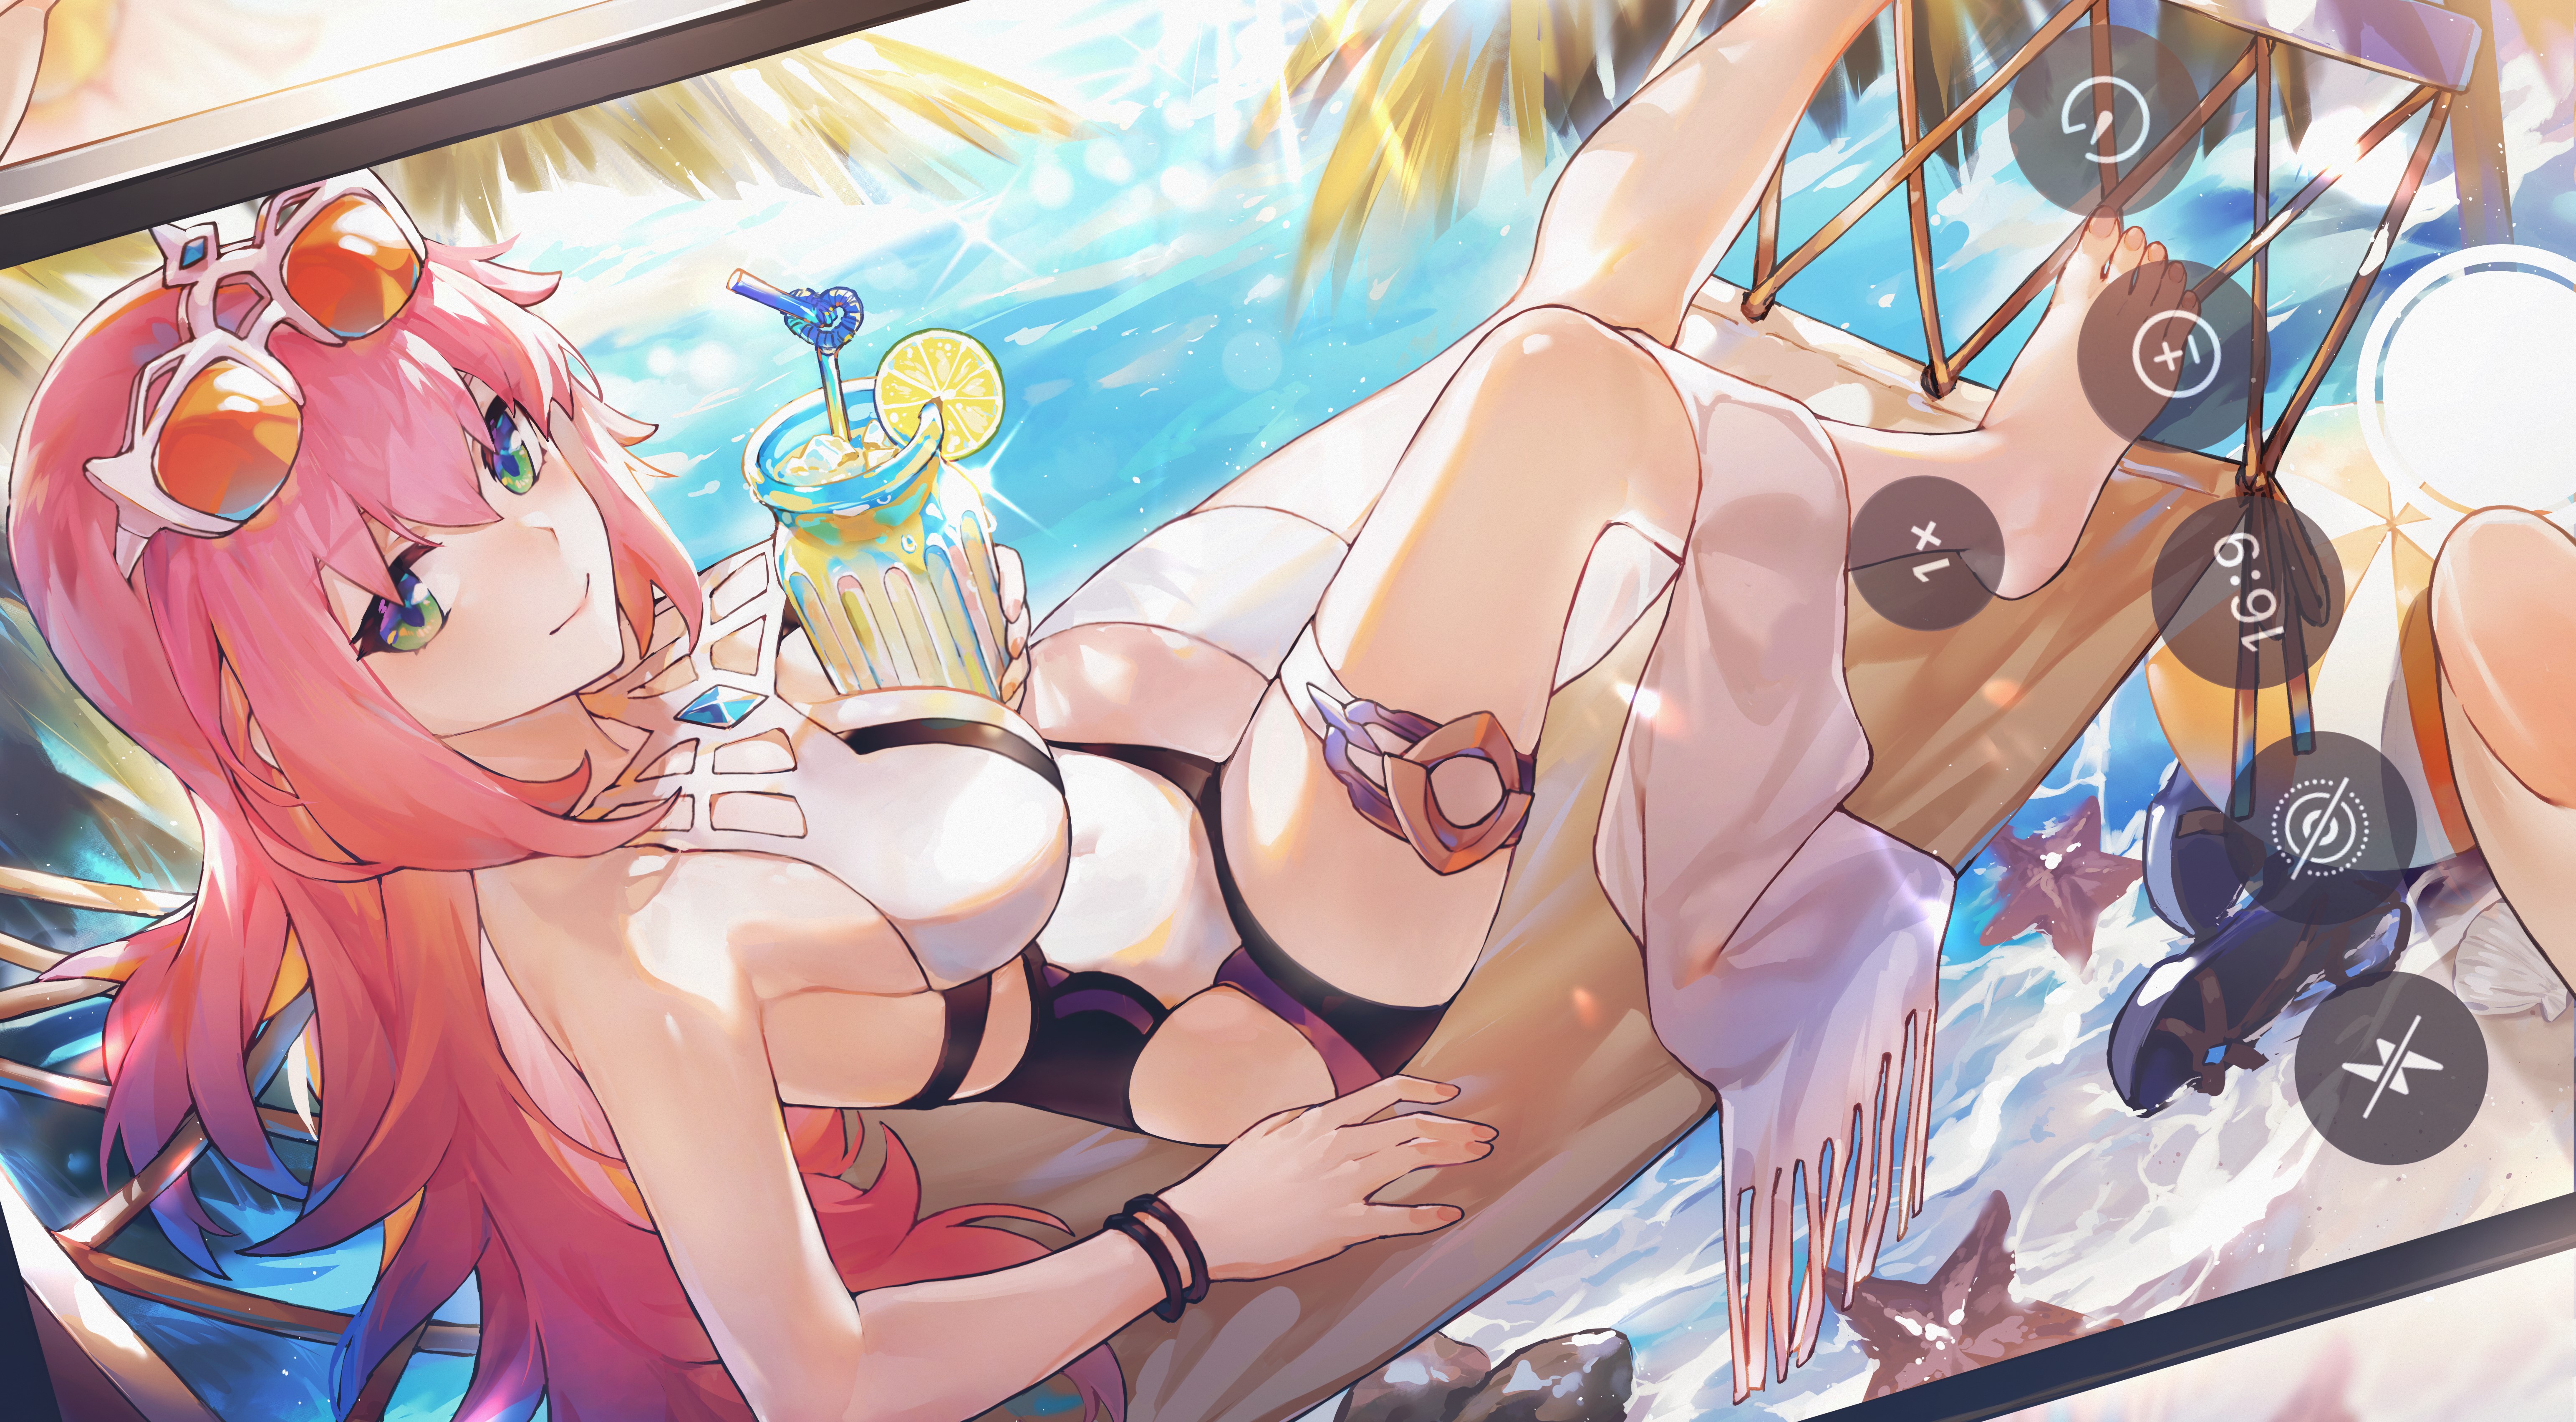 Anime 6173x3408 anime girls looking at viewer POV taking photo cropped swimwear pink hair one-piece swimsuit drink green eyes long hair item between boobs cup beach palm trees hammocks barefoot lying down thigh strap water sunglasses smiling bracelets sunlight beach ball leaves seashells SWKL cocktails white swimsuit legs sideboob smartphone phone feet toes blue eyes